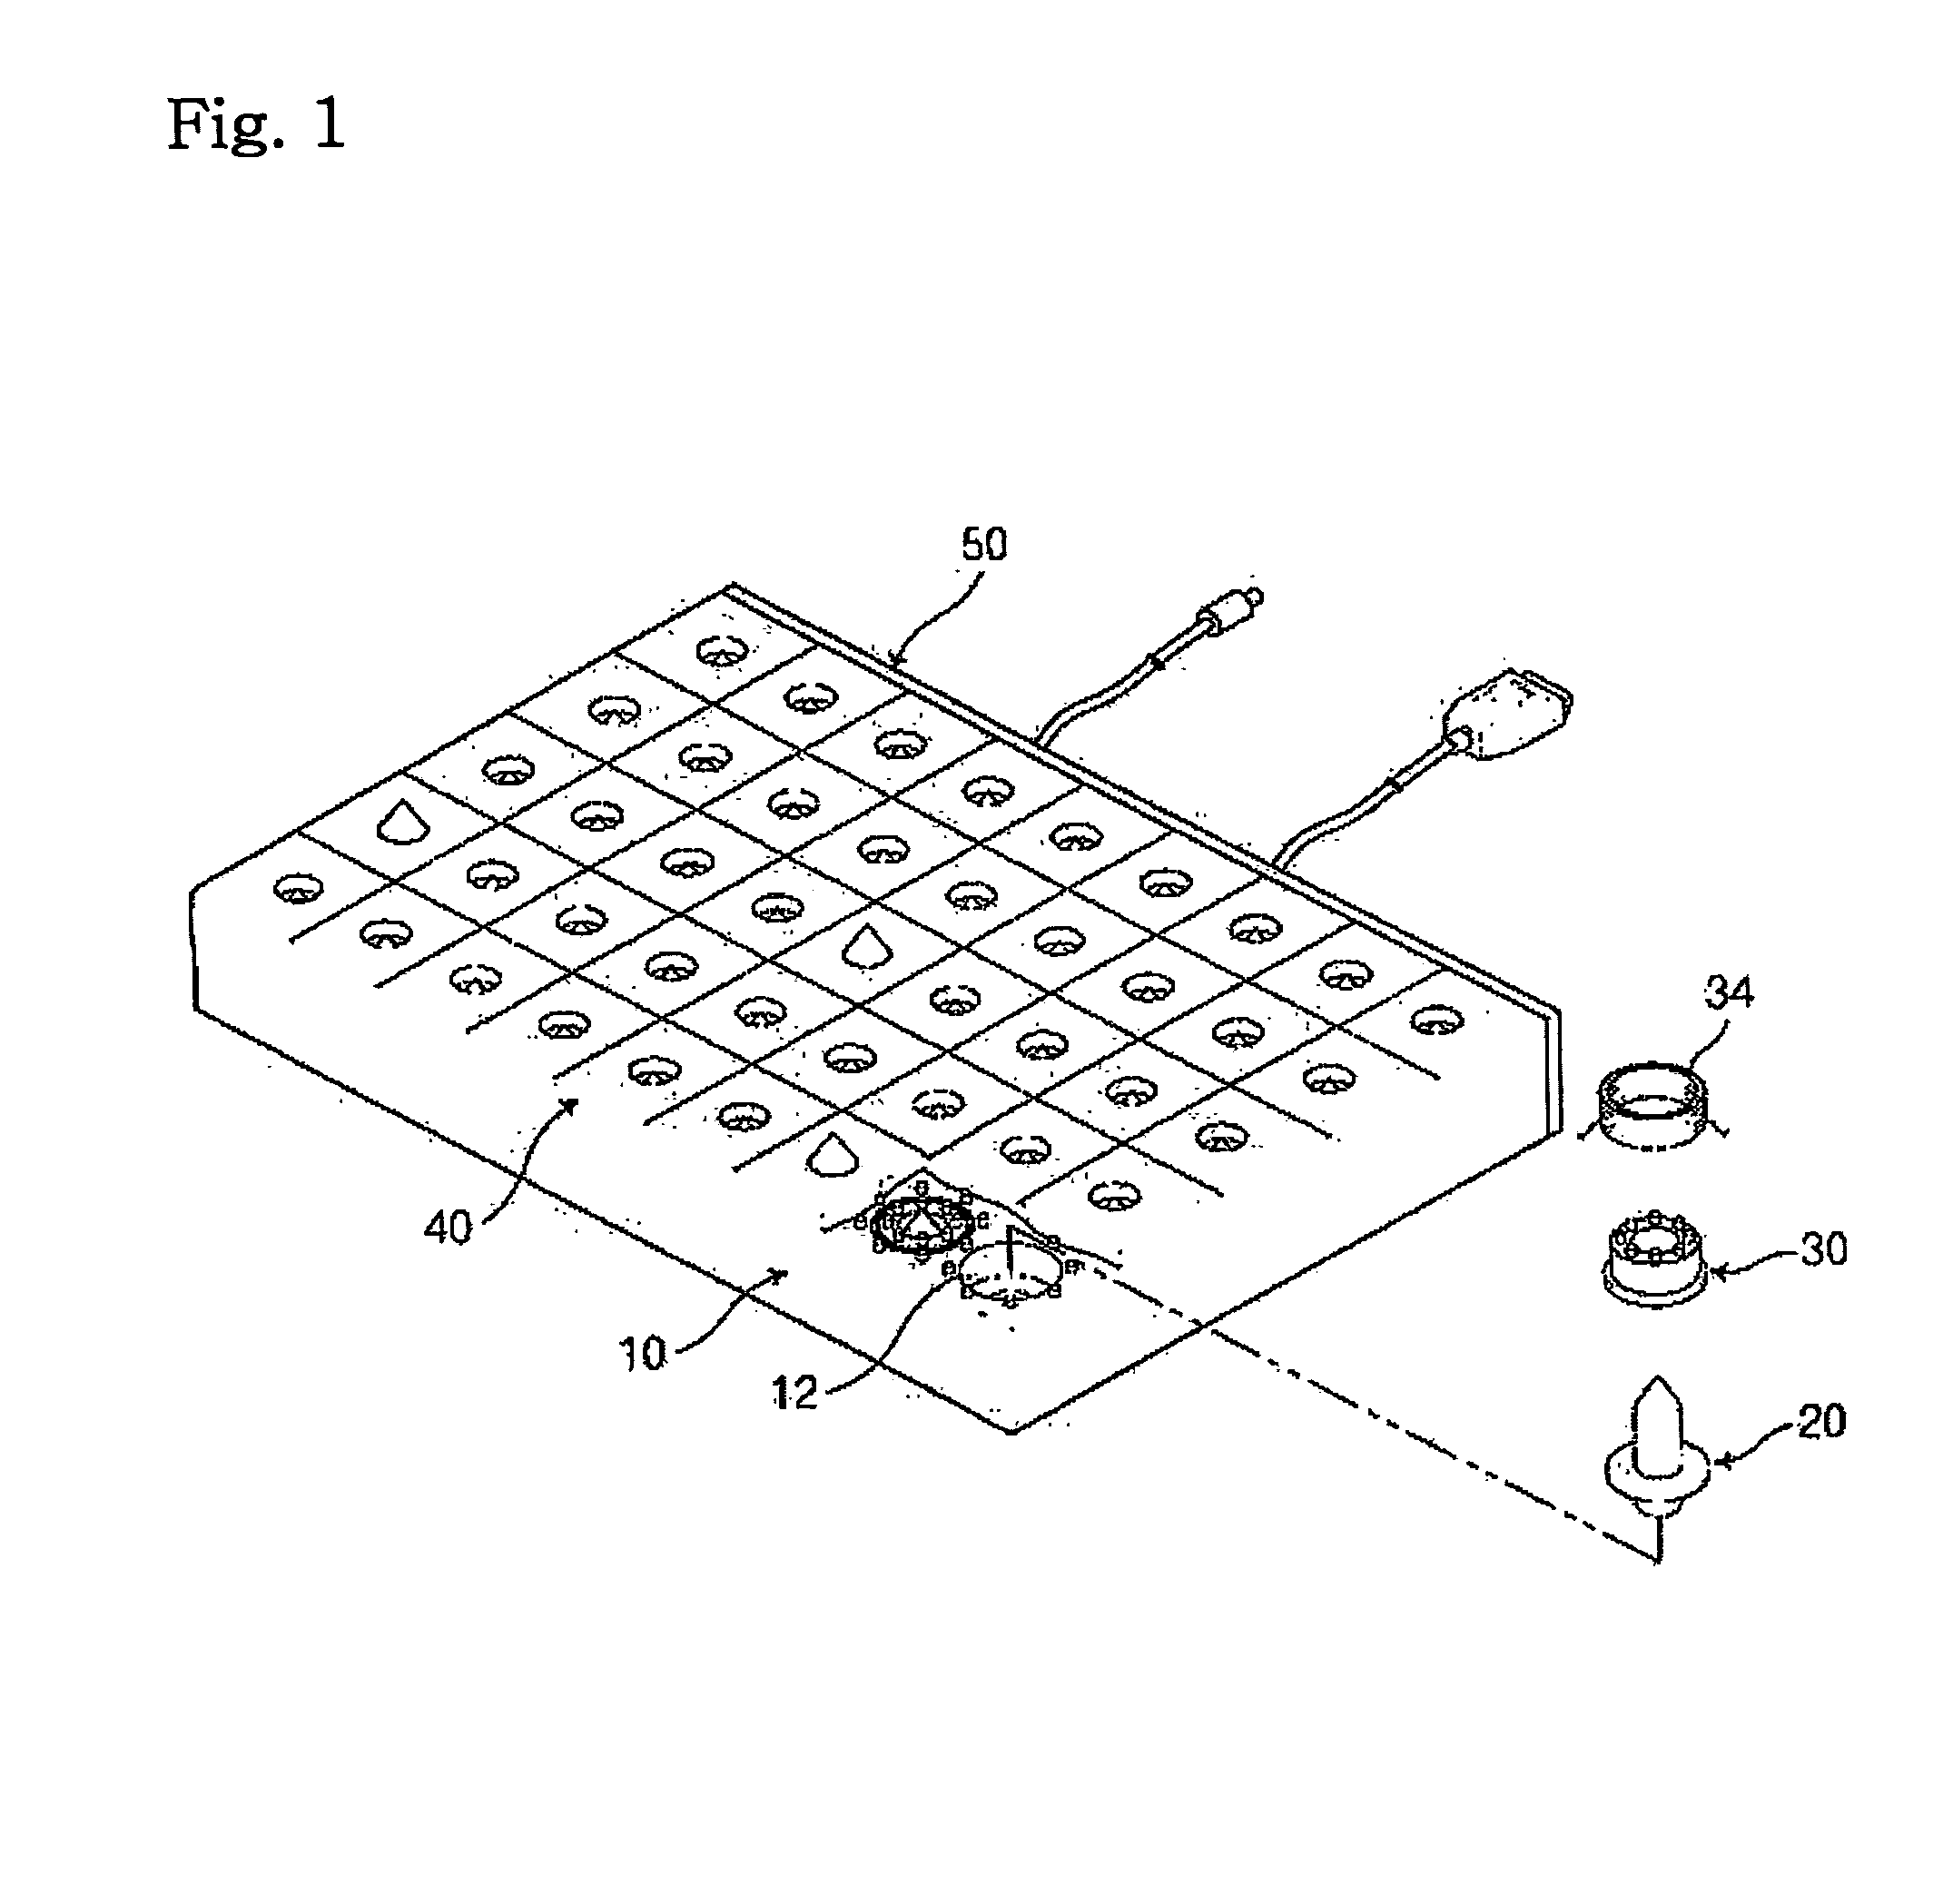 Display Device of Braille Points